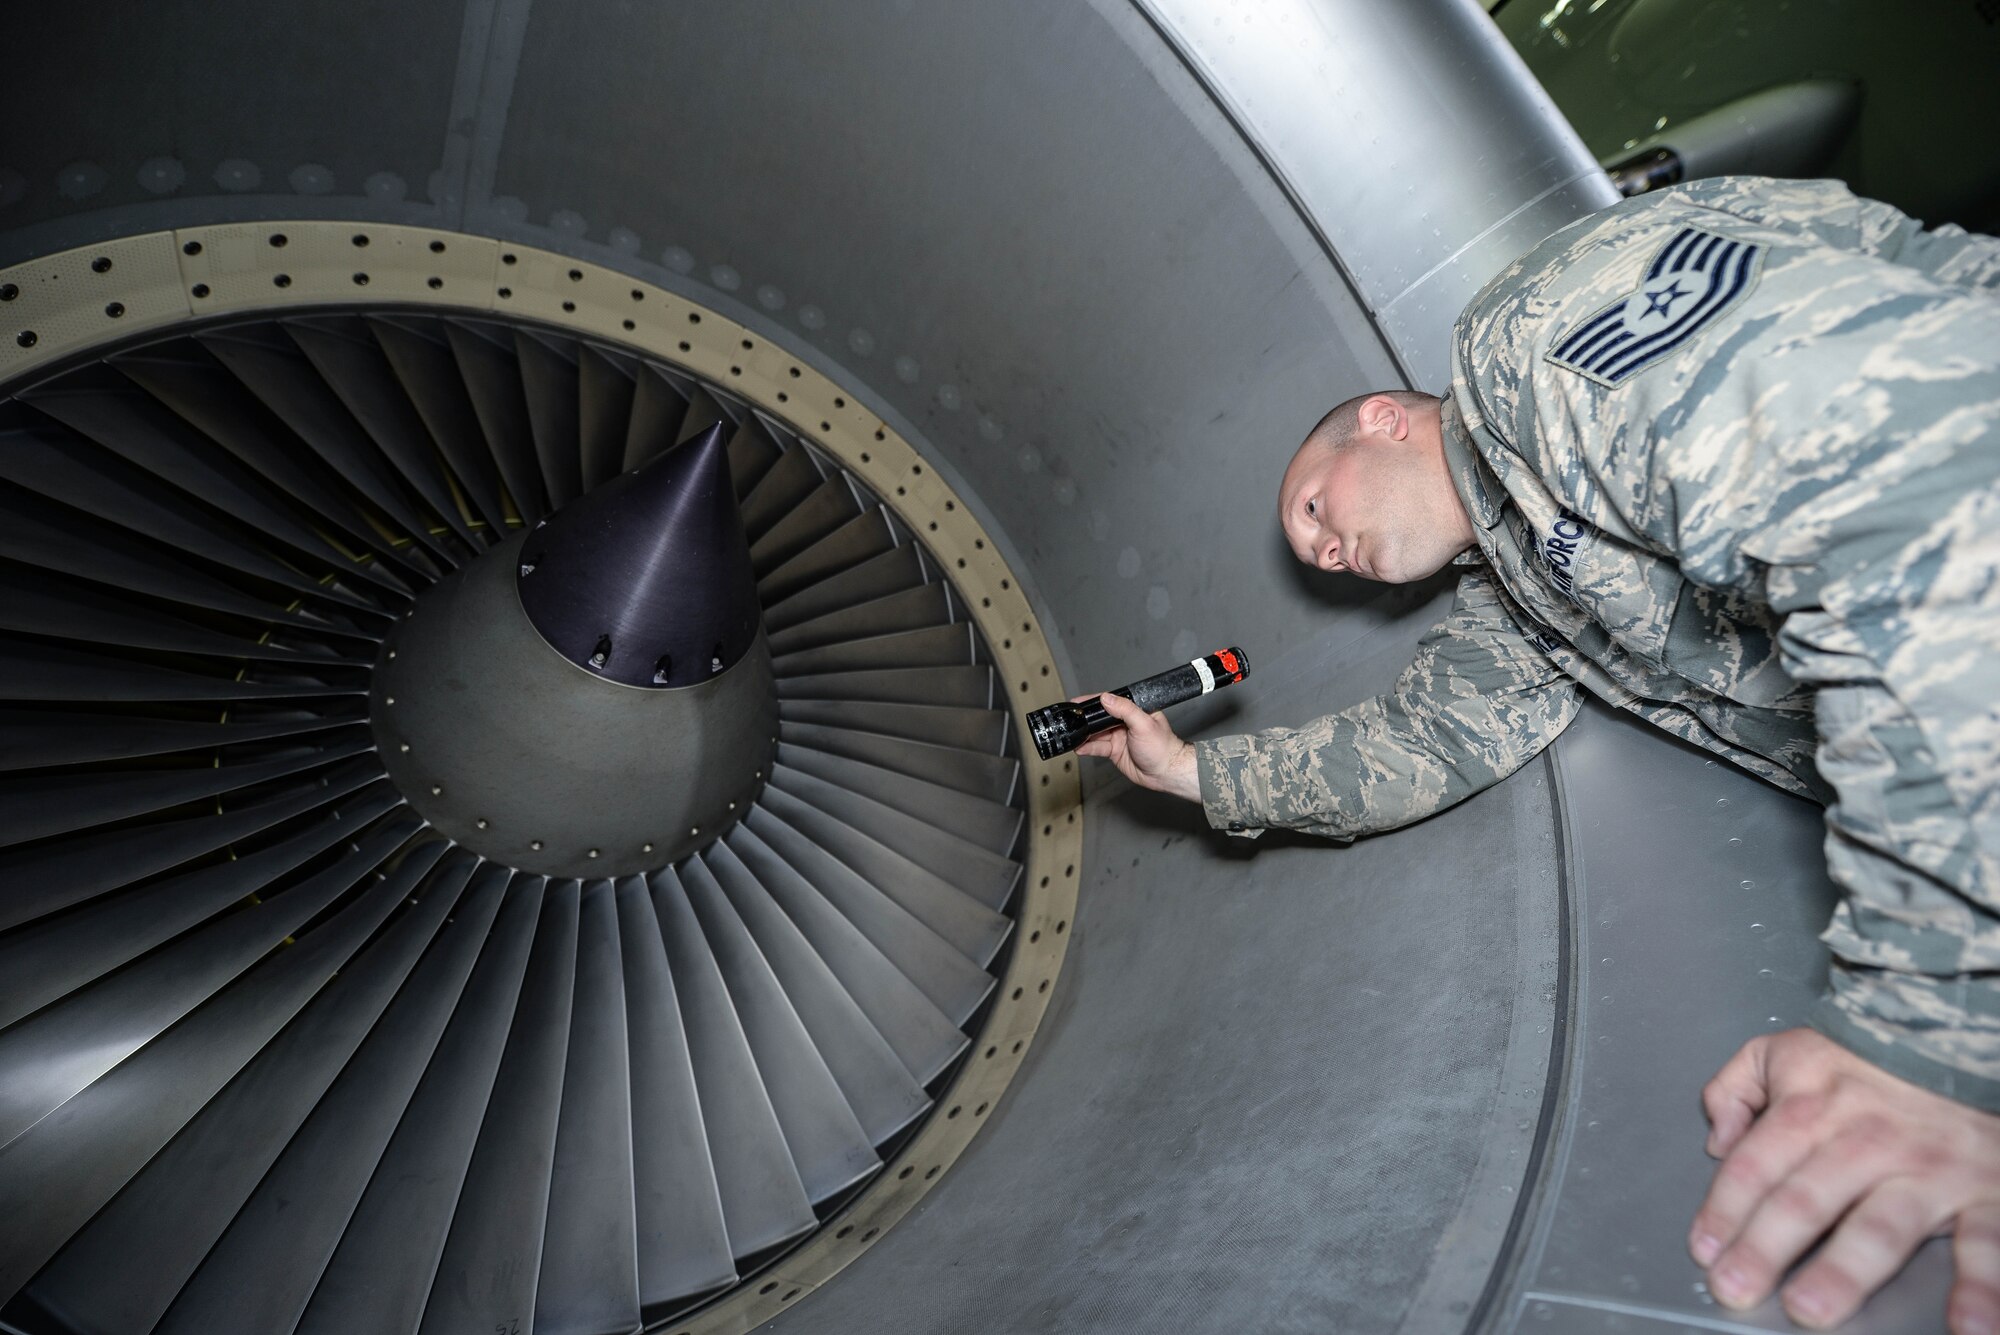 U.S. Air Force Tech. Sgt. Aaron Wilkes, 55th Aircraft Maintenance Squadron dedicated crew chief, inspects the fan blades of a RC-135 Rivet Joint April 24 in the Bennie Davis Maintenance Facility on Offutt Air Force Base, Nebraska. Wilkes is part of the 83rd Aircraft Maintenance Unit. (U.S. Air Force photo by Zachary Hada)